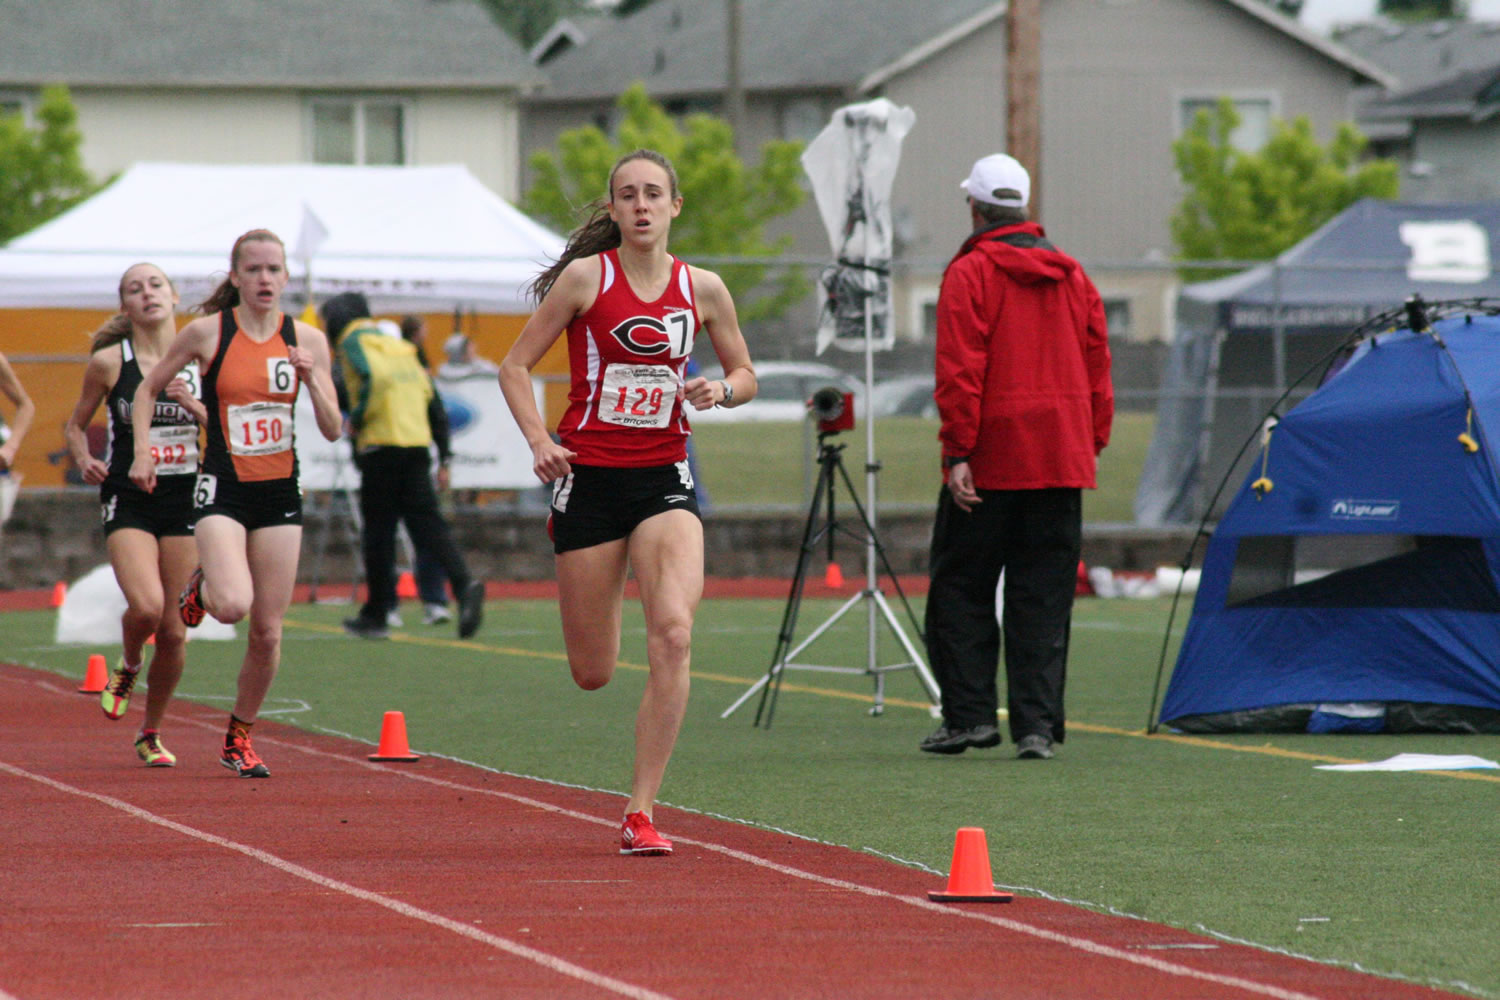 Camas runner Alexa Efraimson finished in first place in the 1,500-meter run at the World Youth Track and Field Trials last month in Edwardsville, Ill.